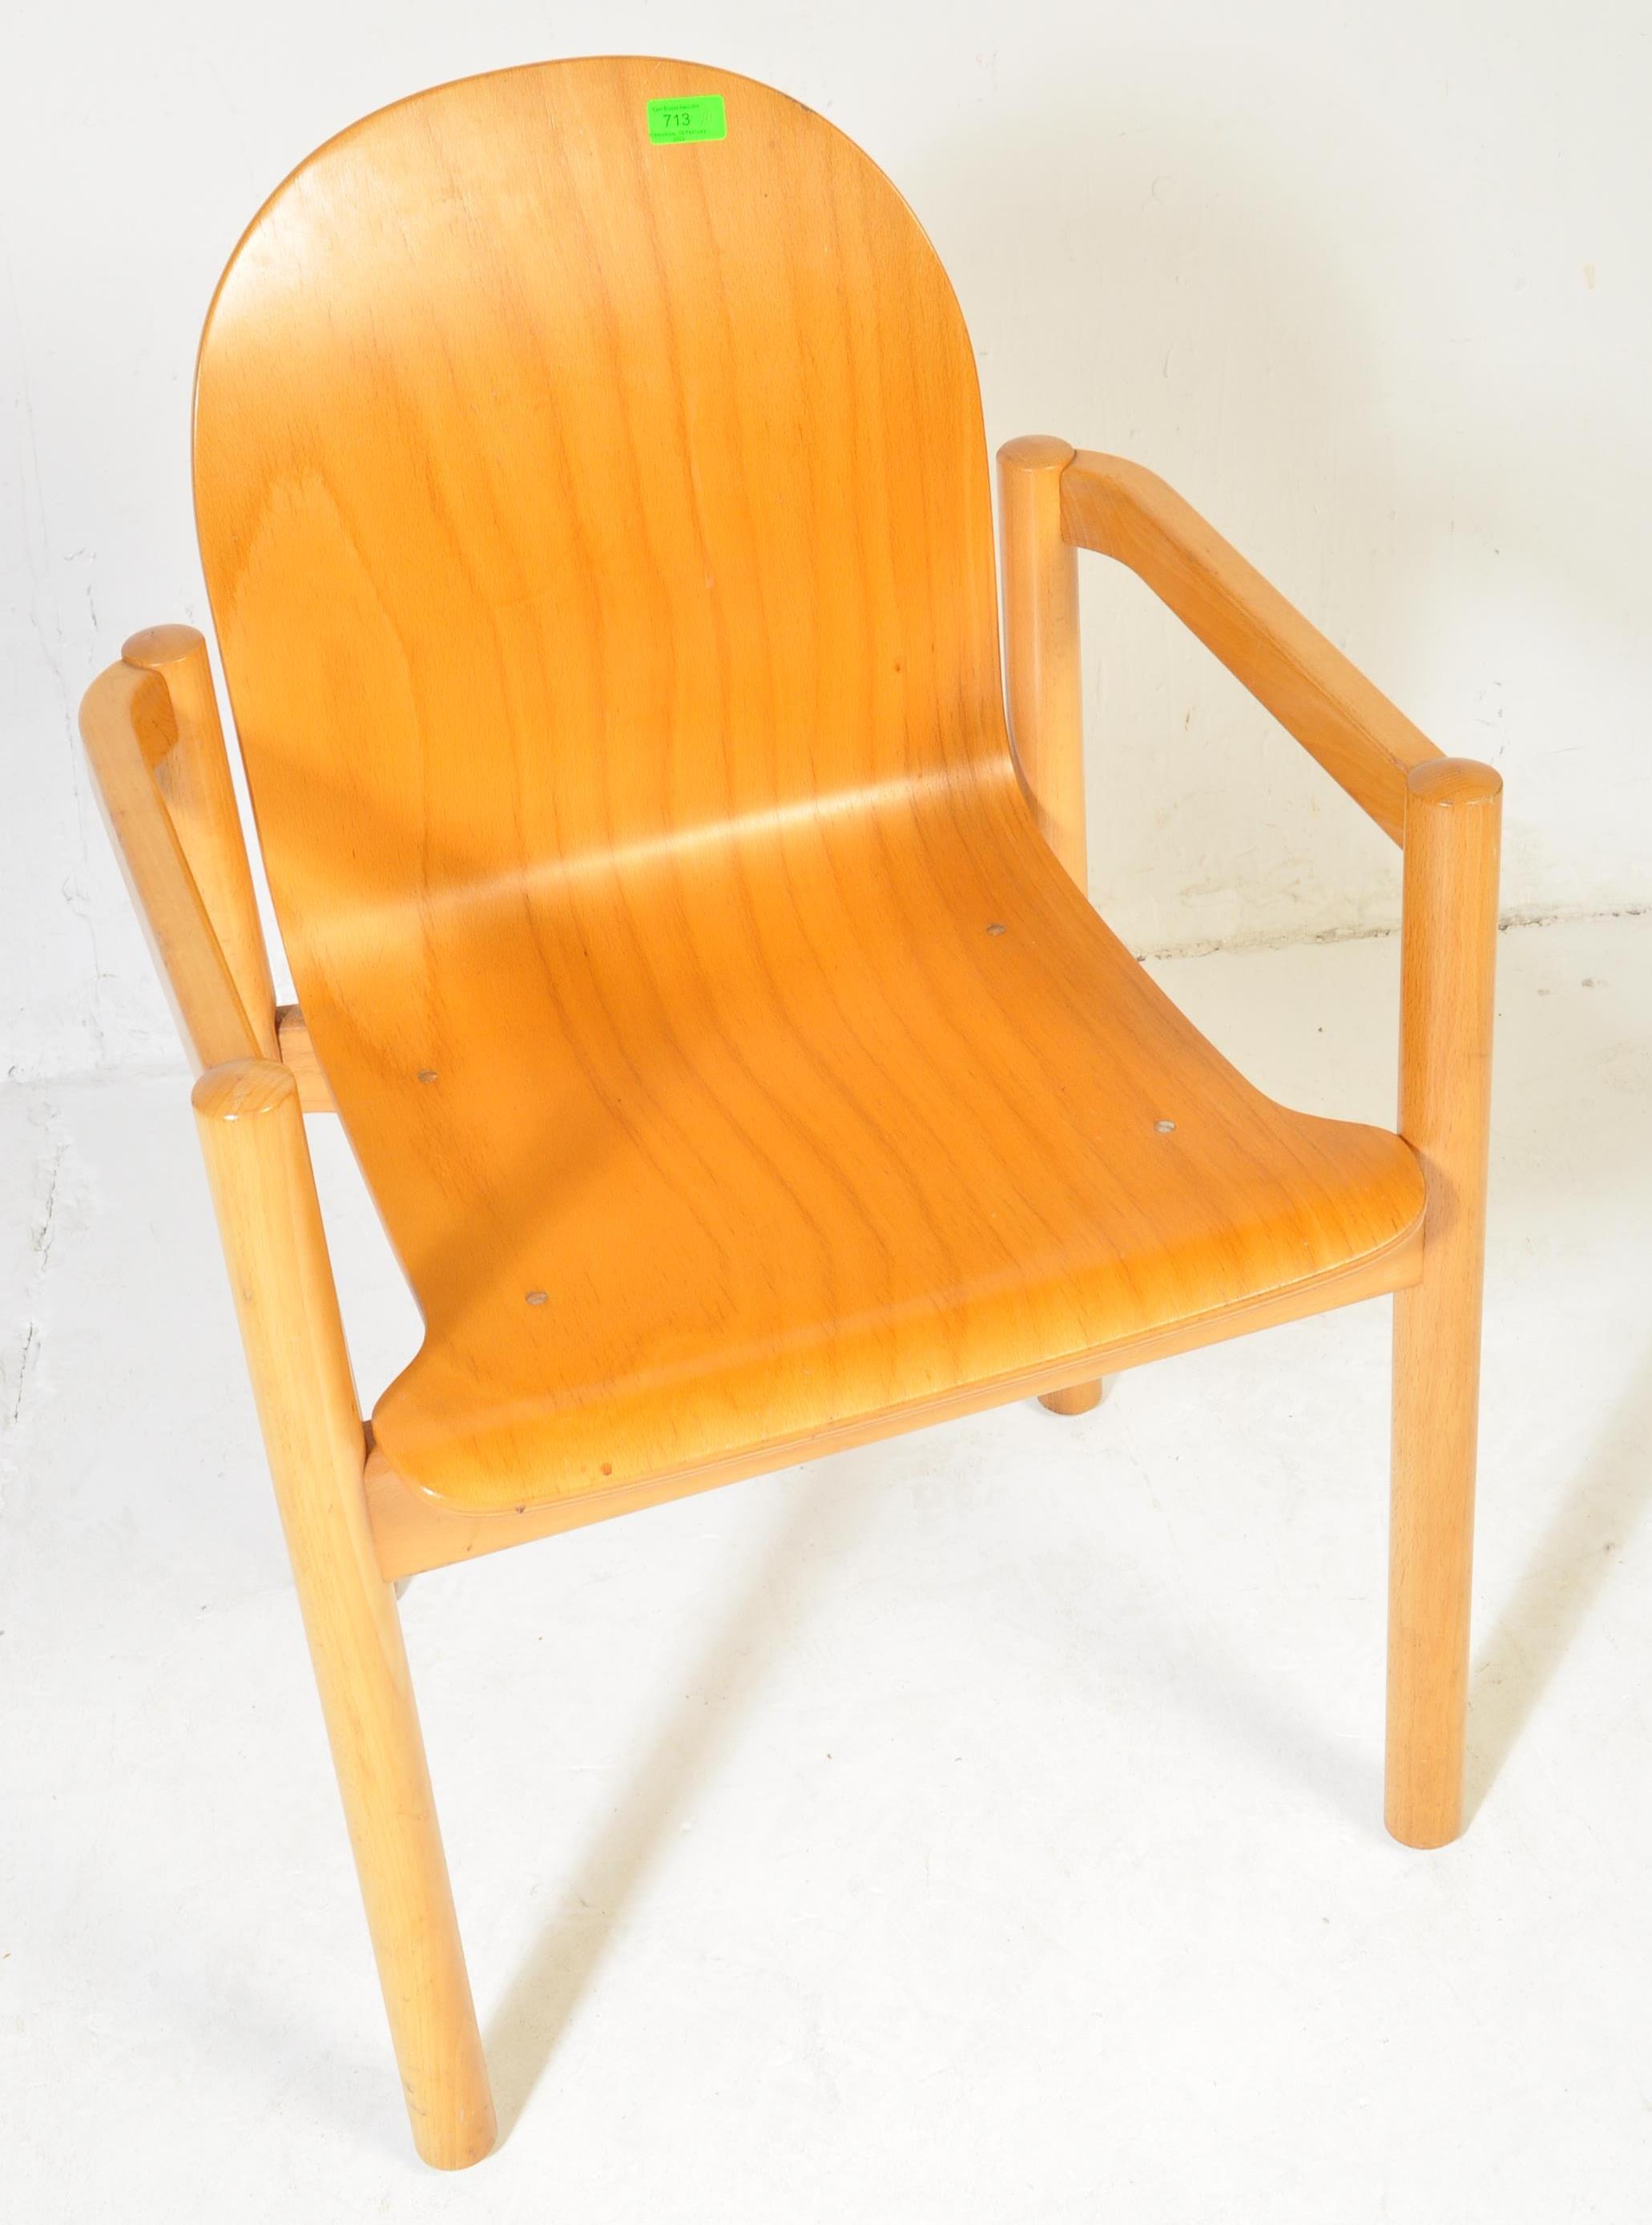 RETRO VINTAGE BENTWOOD OFFICE CHAIR - Image 2 of 4